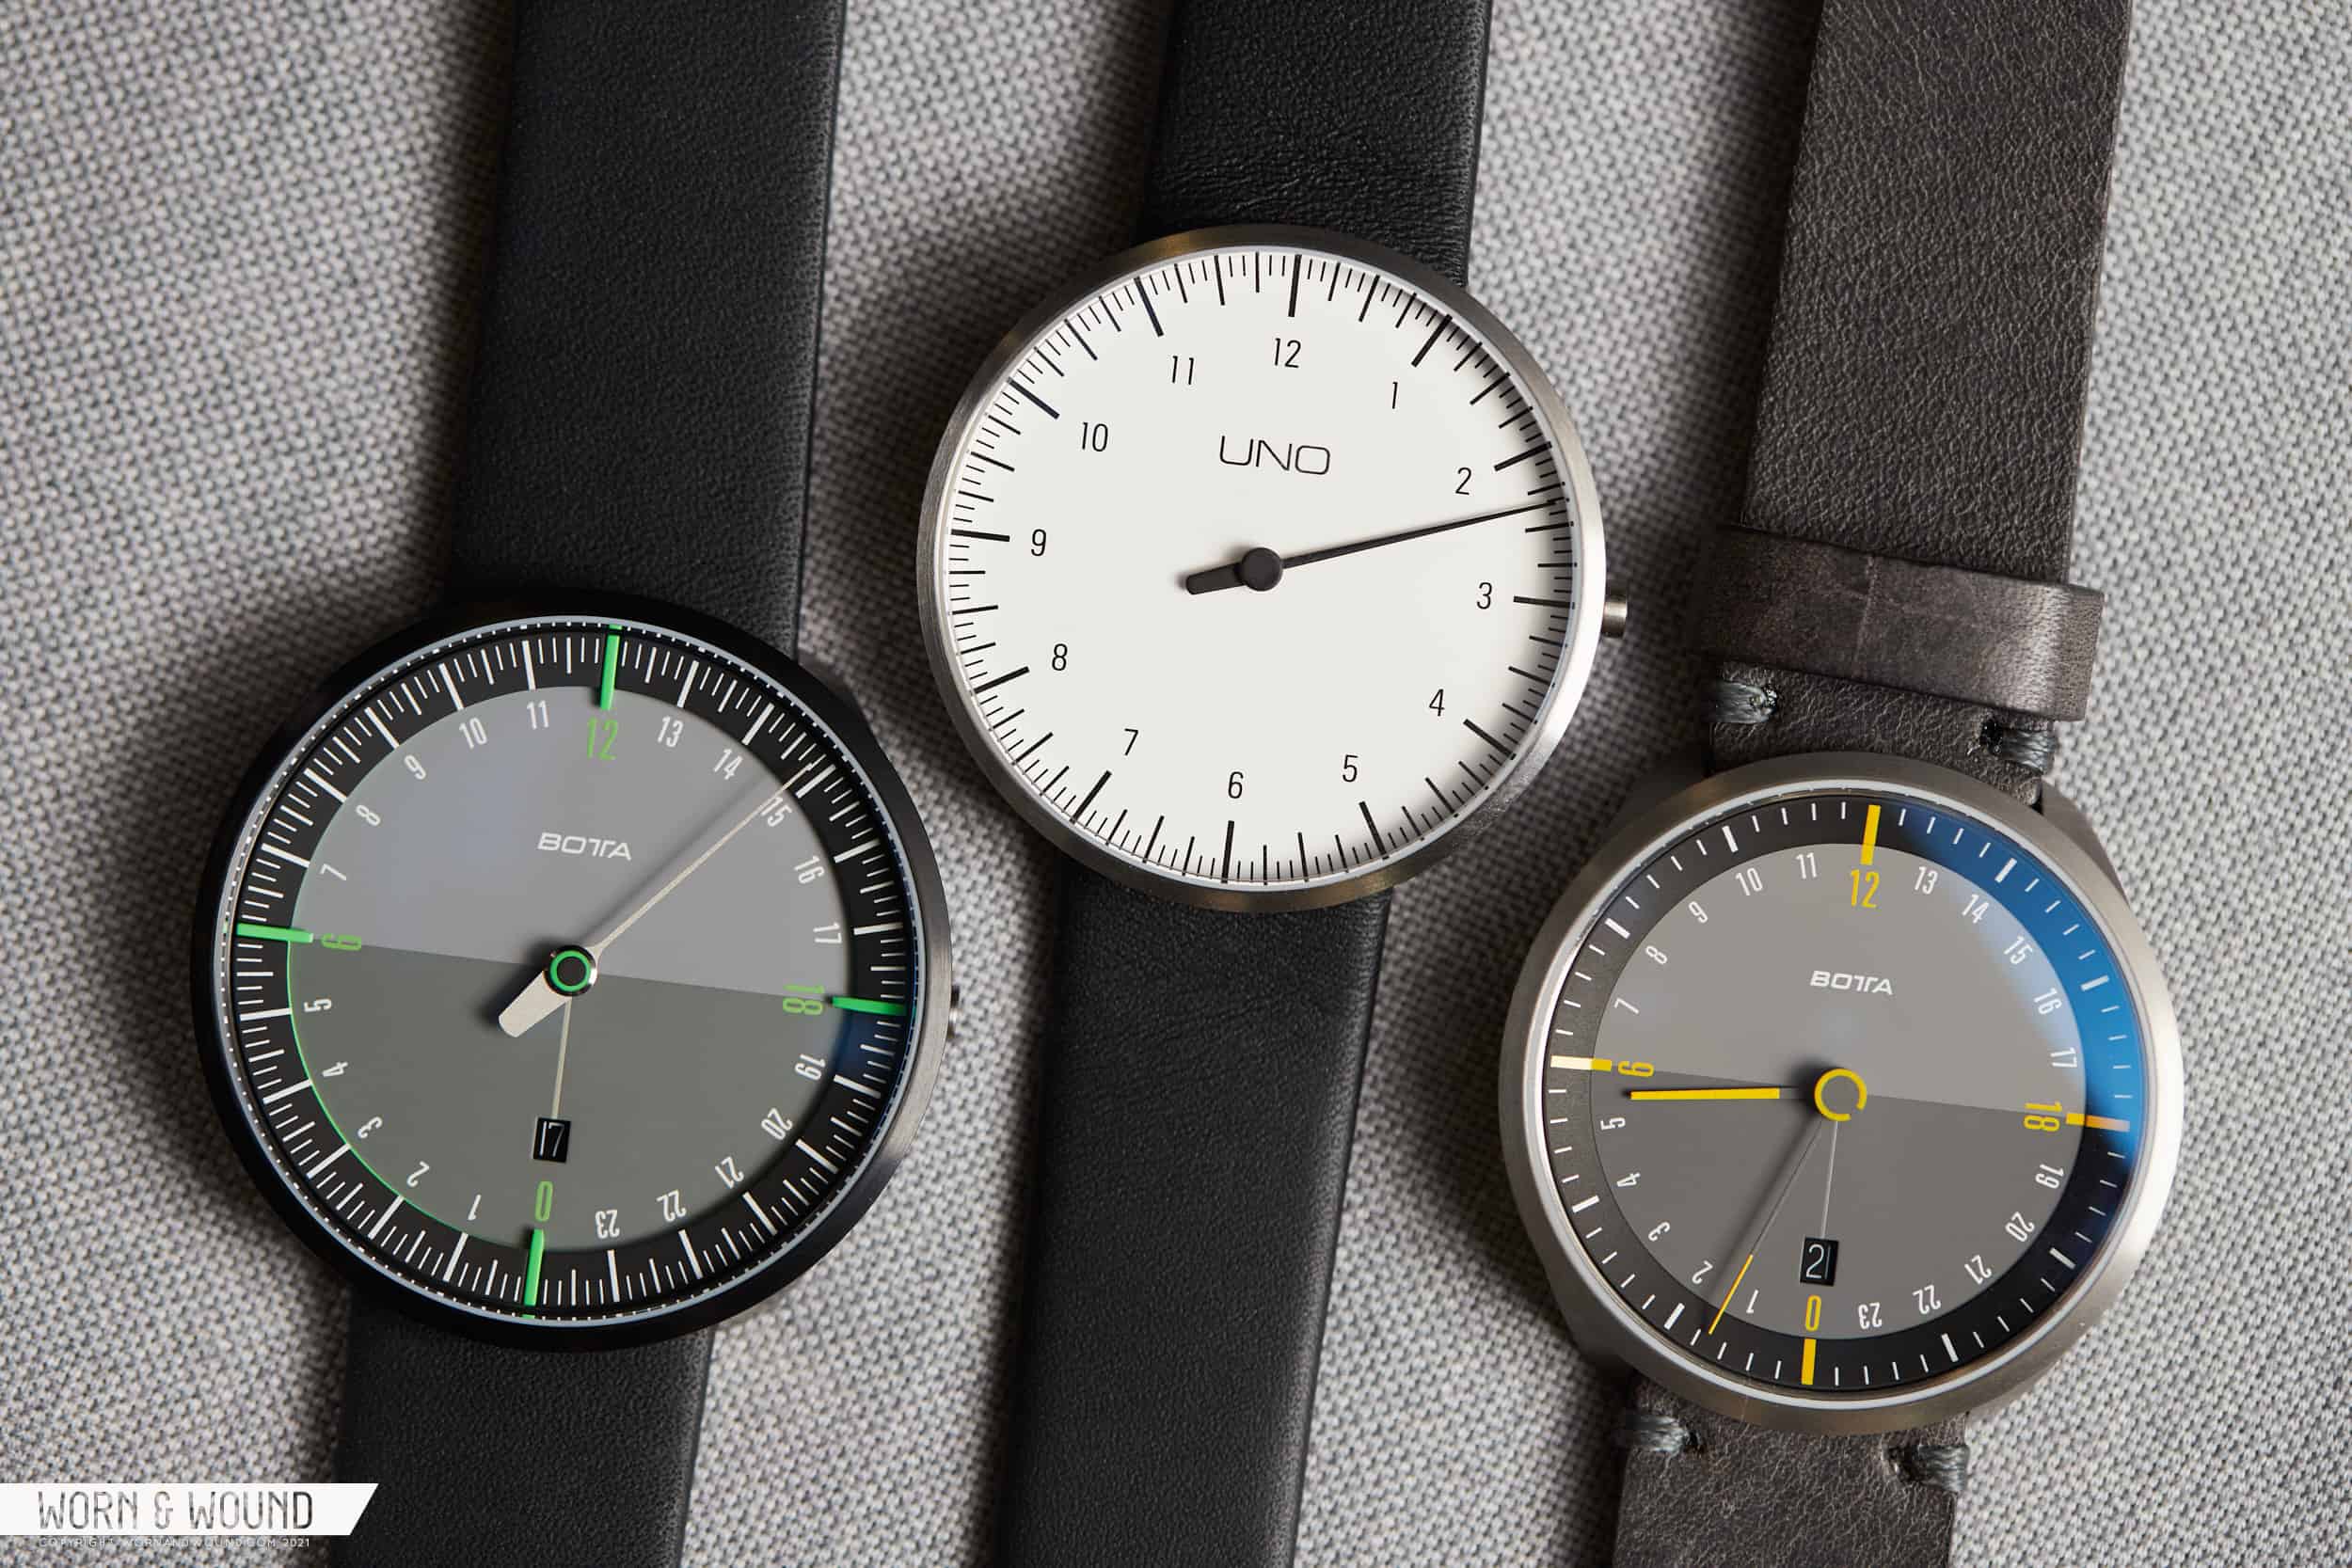 Hands-On With The Unexpected Watches Of Botta Design